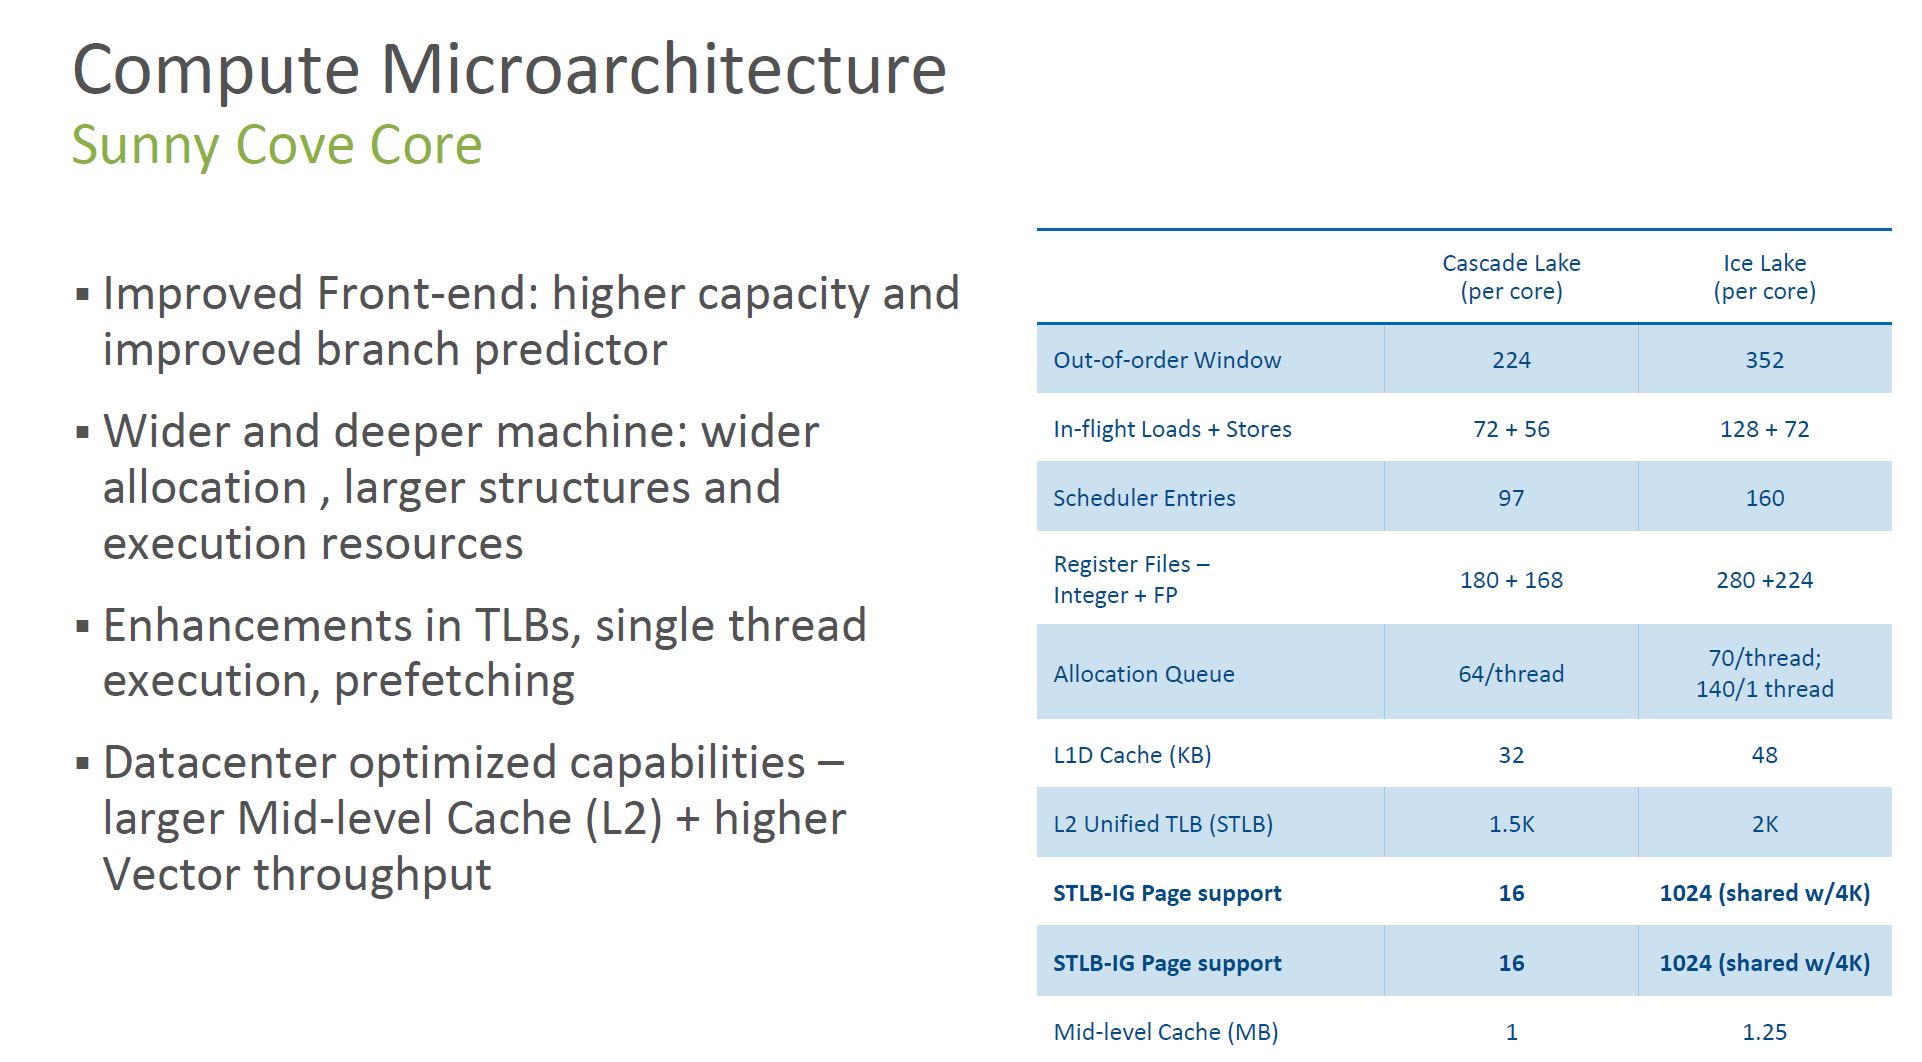 3rd Generation Intel Xeon Scalable Ice Lake Microarchitecture 1 Sunny Cove Core